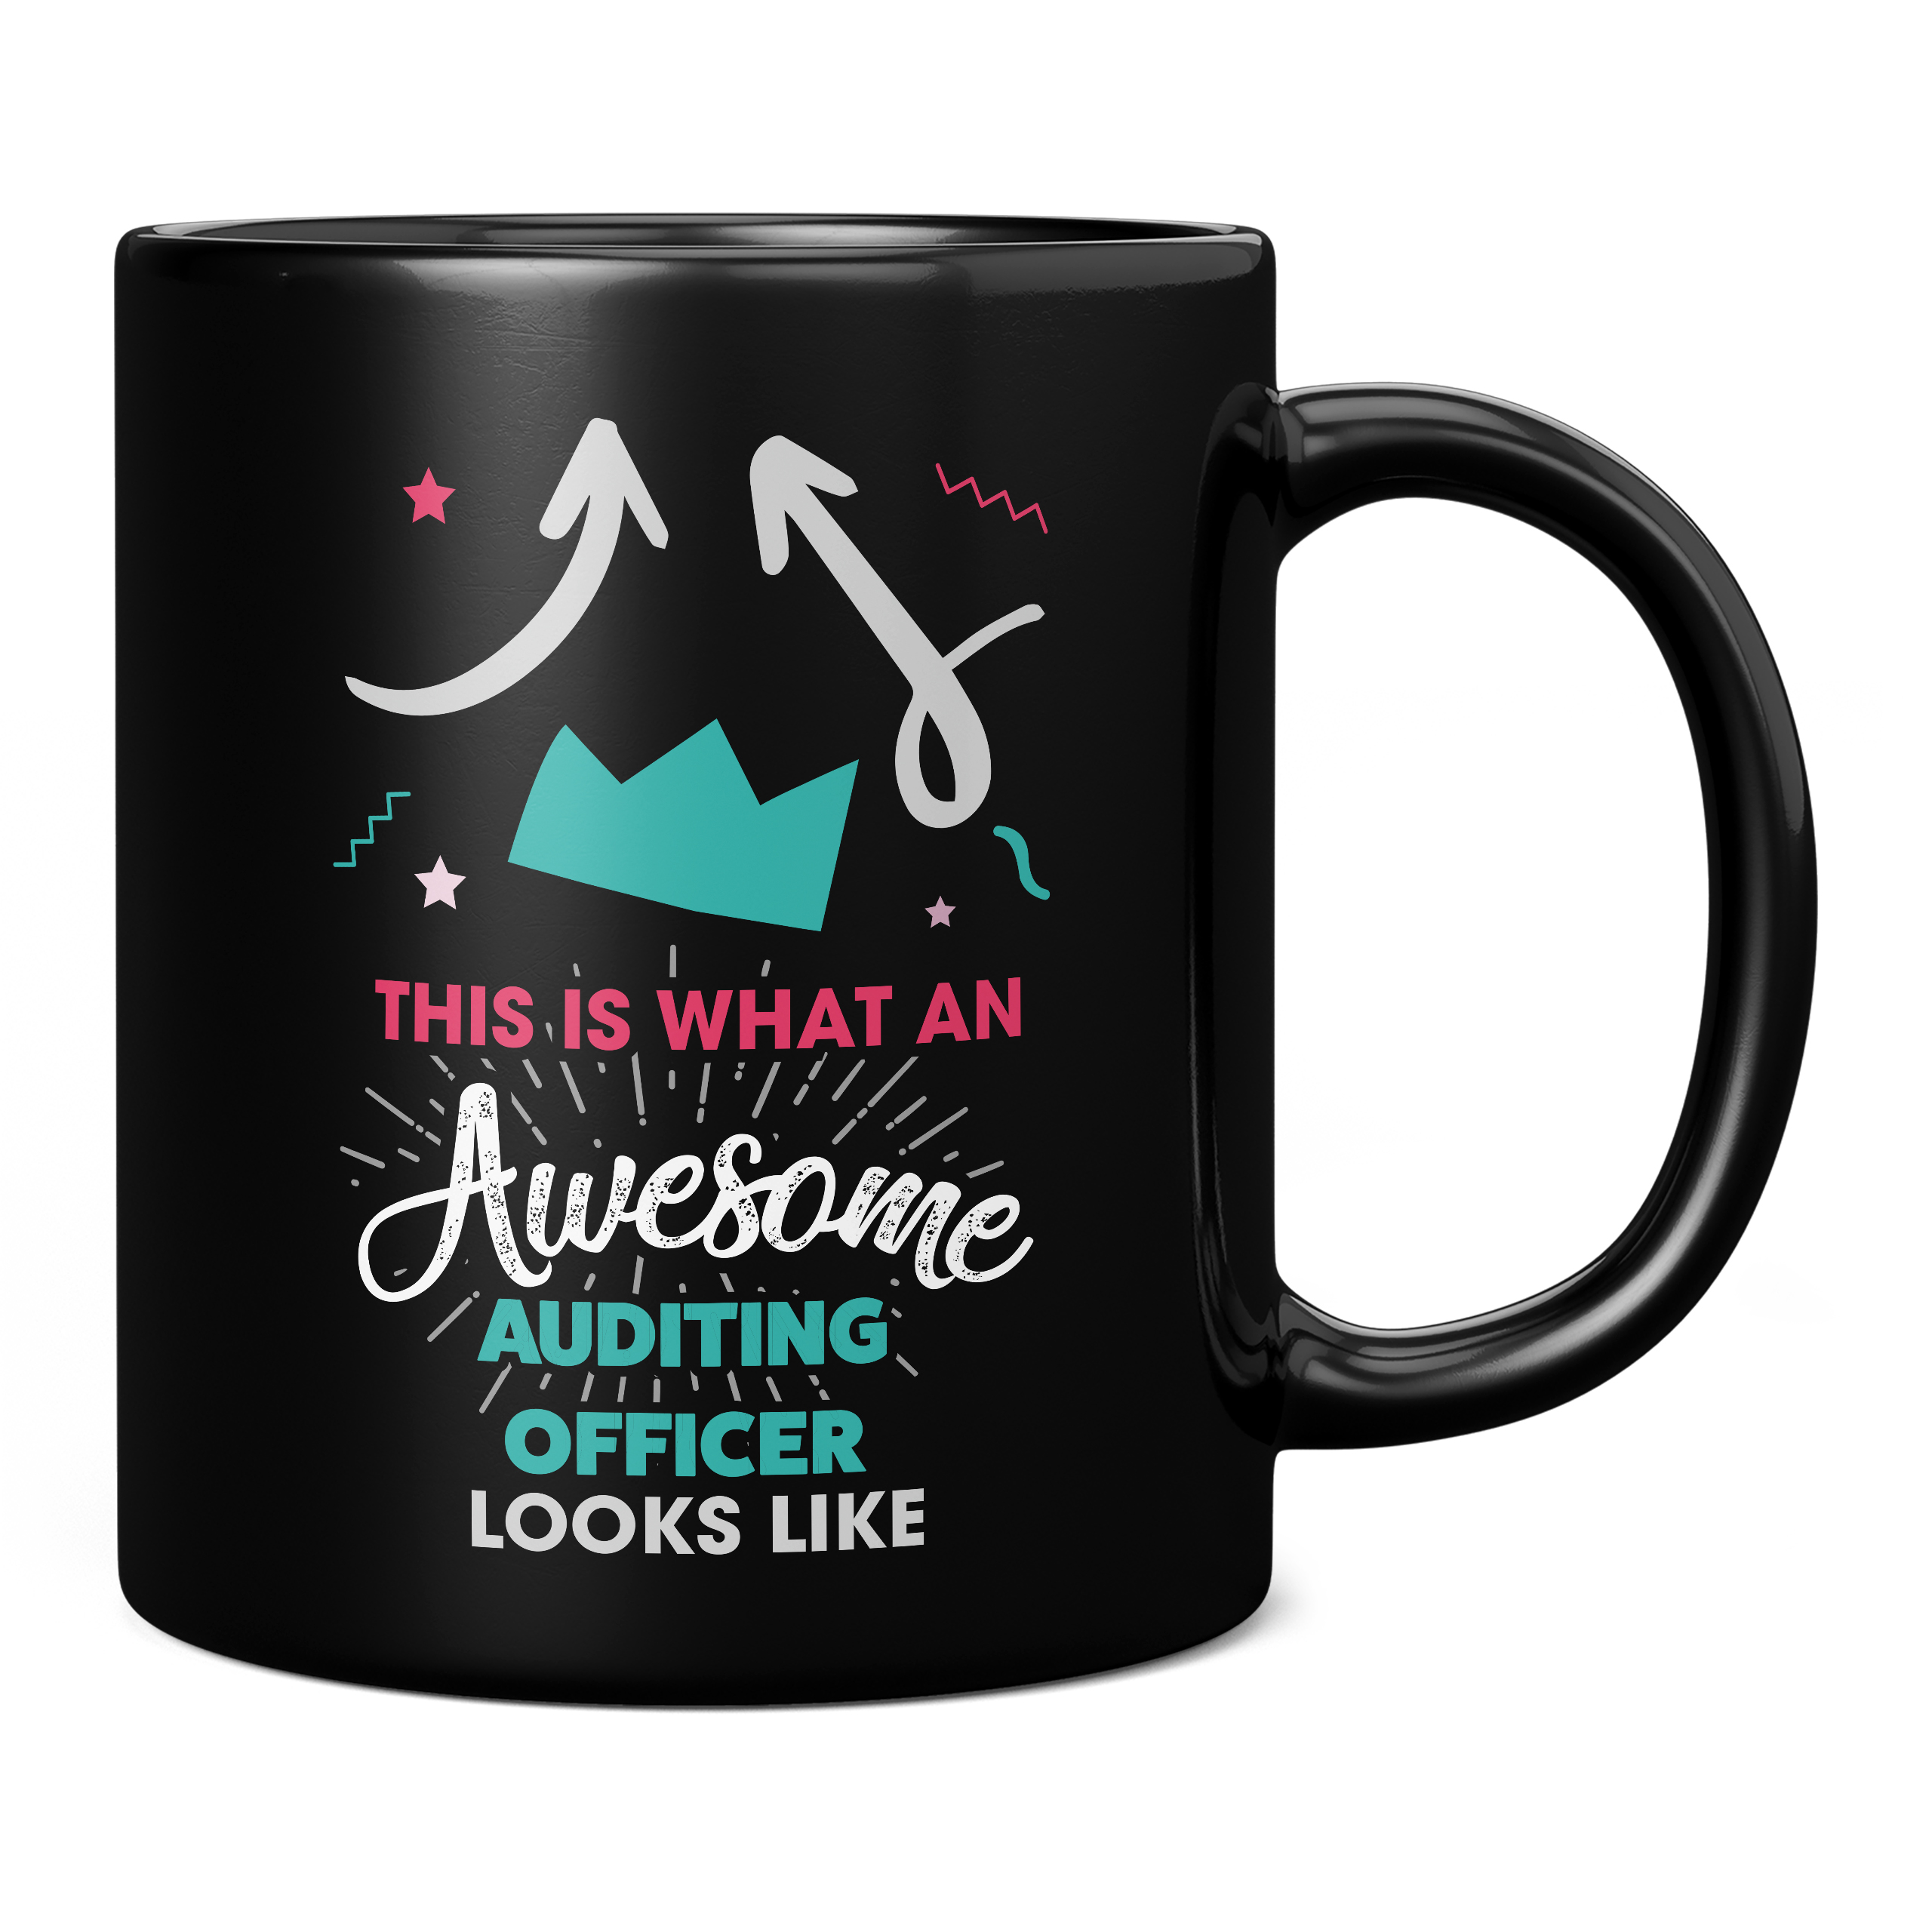 THIS IS WHAT AN AWESOME AUDITING OFFICER LOOKS LIKE 11OZ NOVELTY MUG